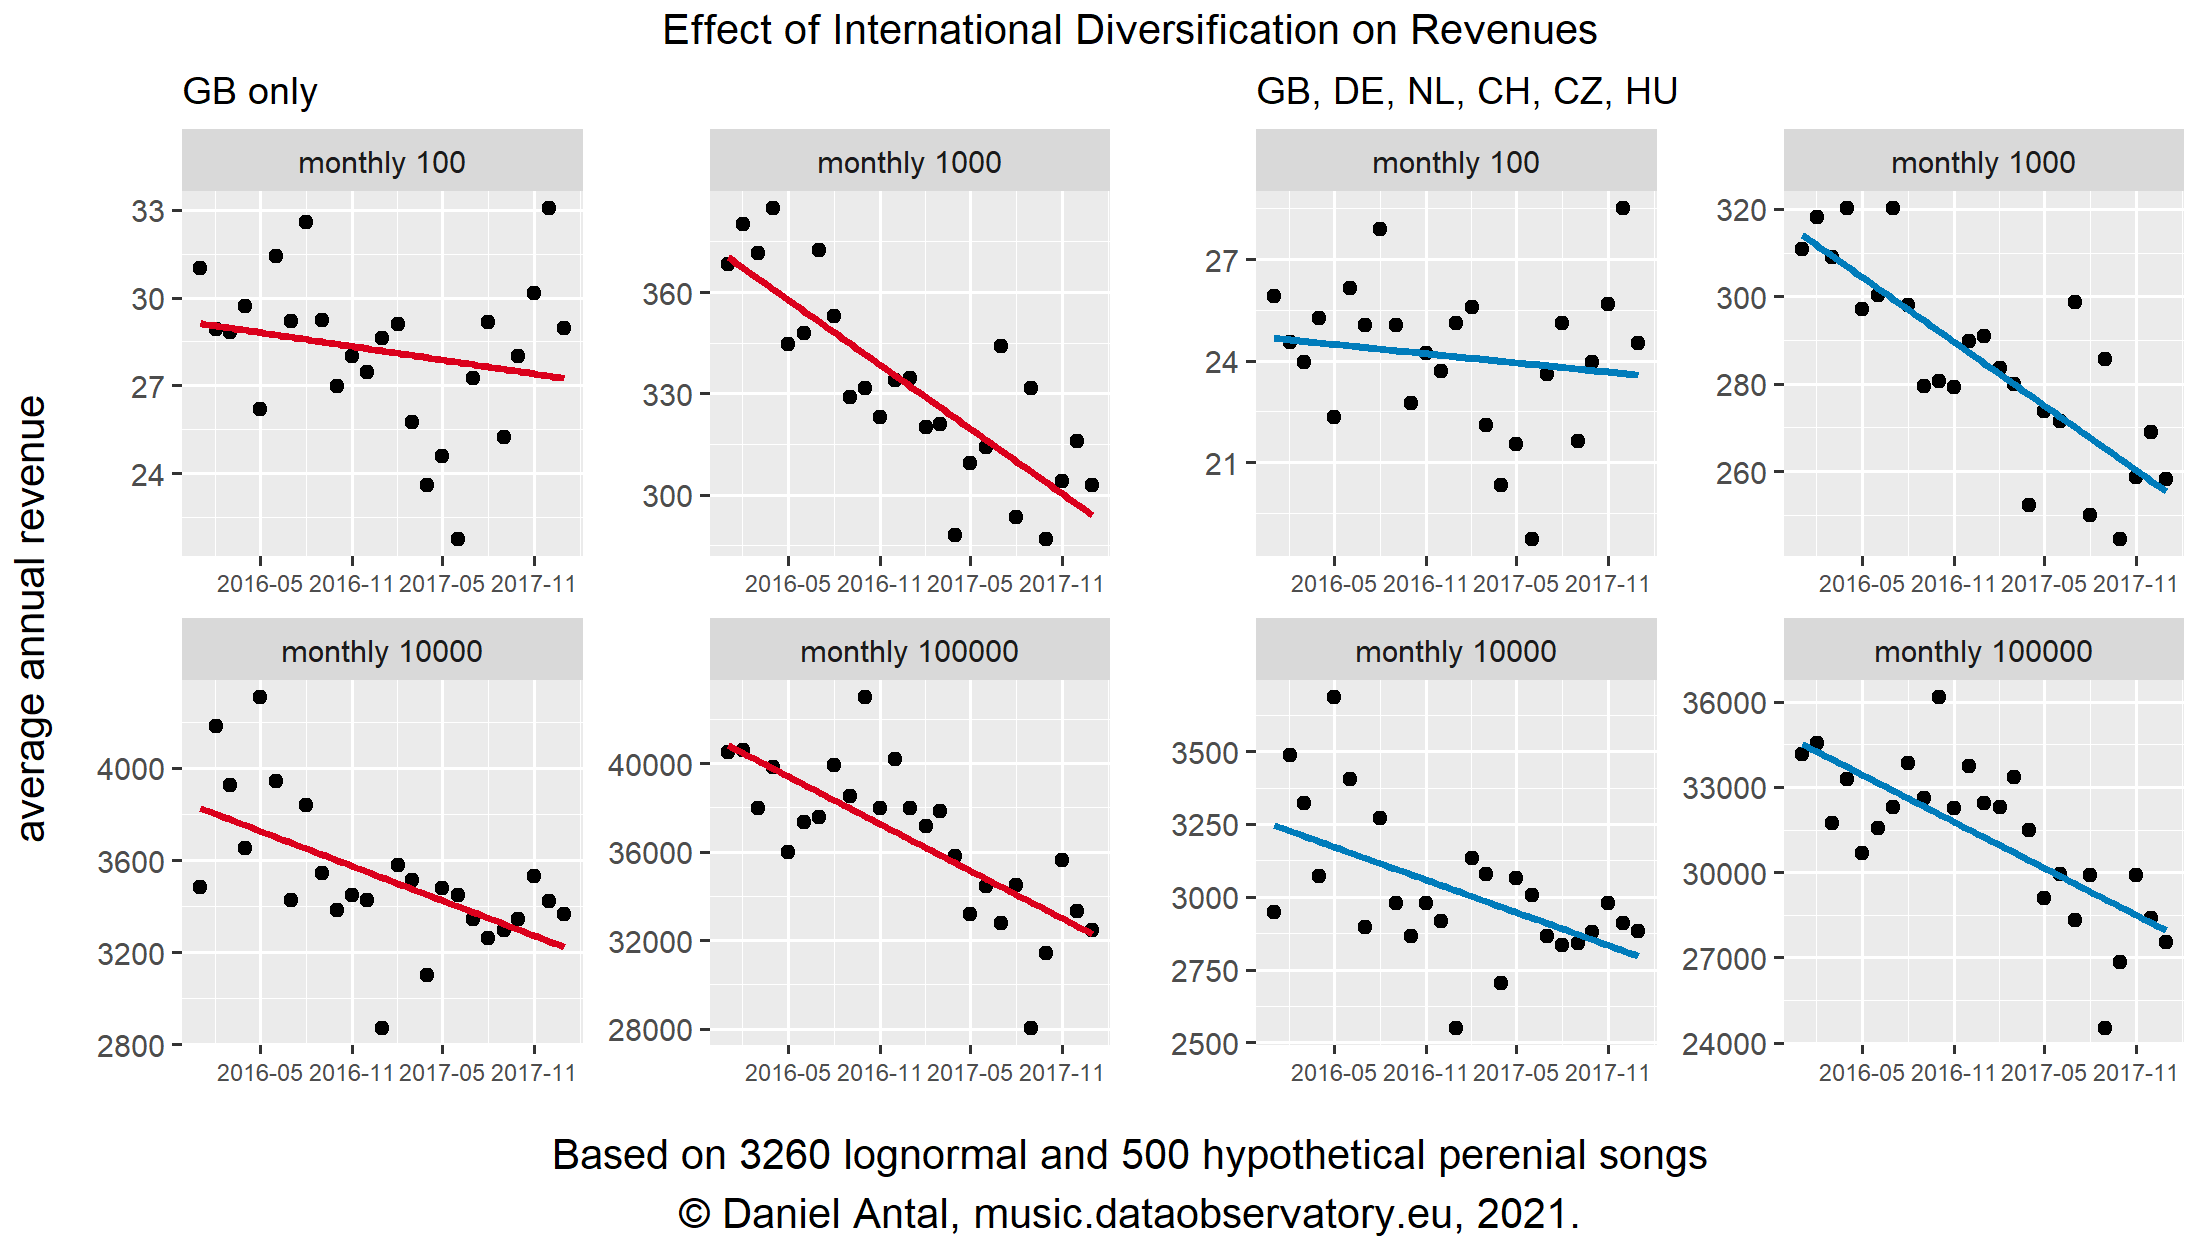 Effect of International Diversification on Revenues, Side-by-Side Comparison